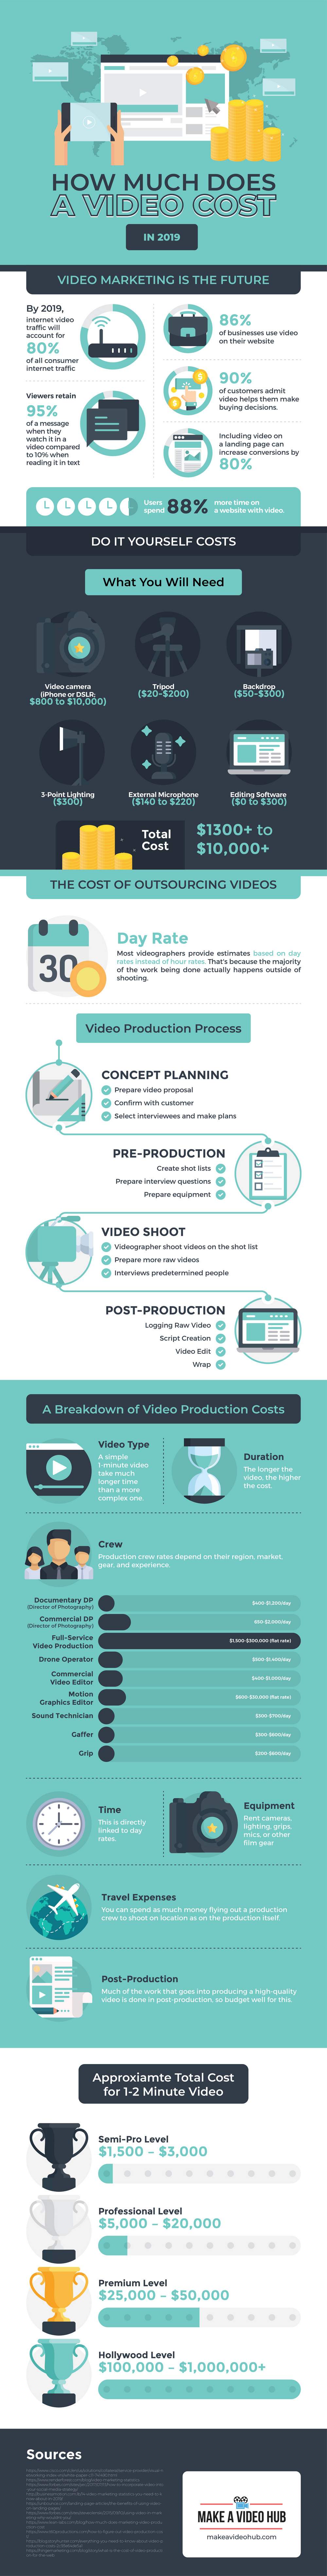 How Much Does a Video Cost in 2019